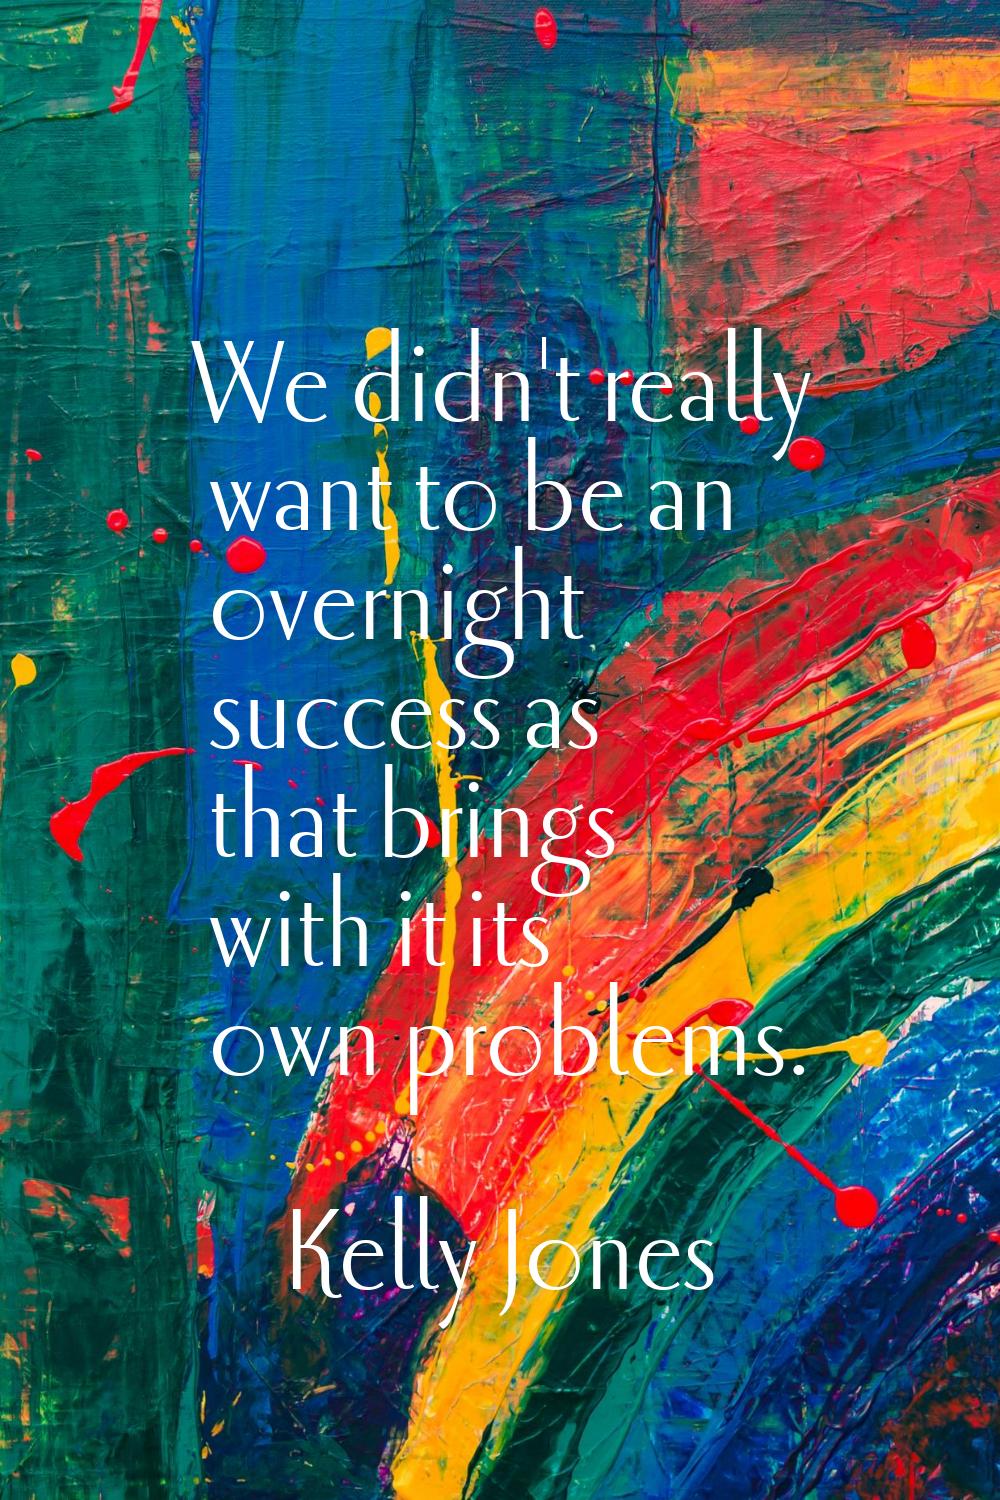 We didn't really want to be an overnight success as that brings with it its own problems.